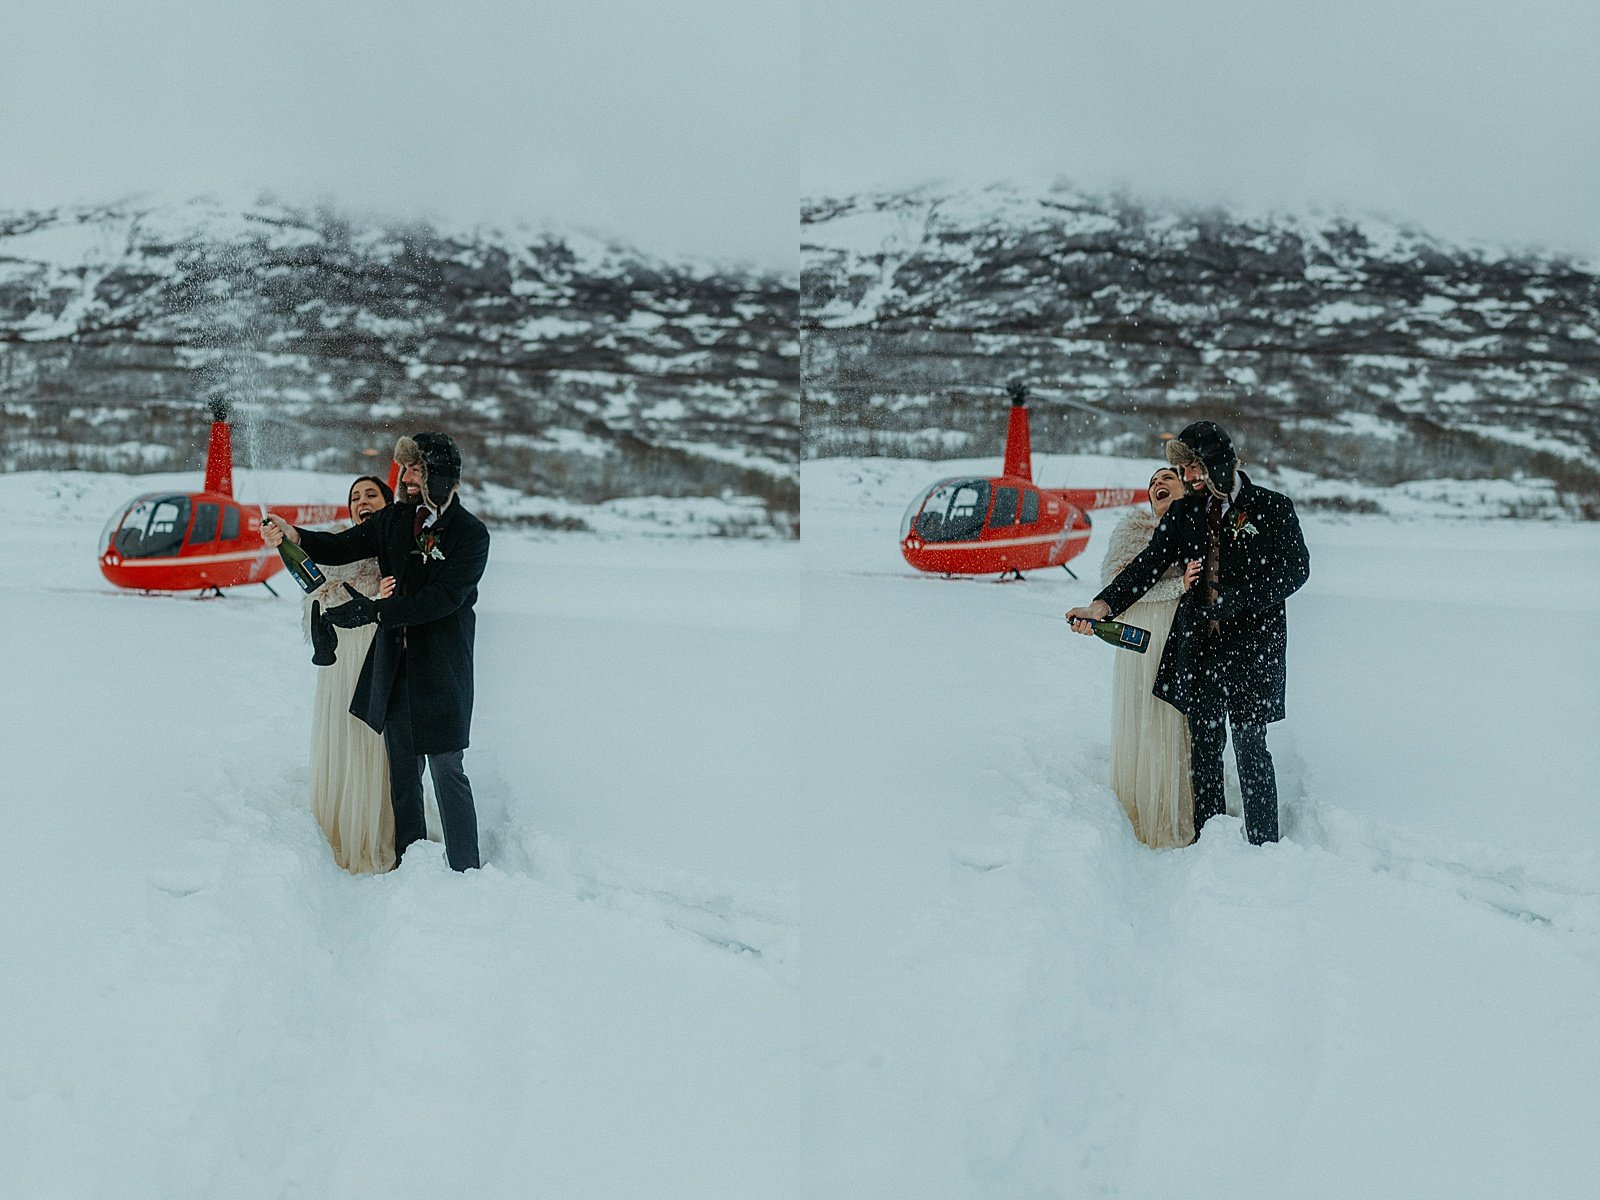  Newlyweds popping champagne on a glacier to celebrate their new marriage 